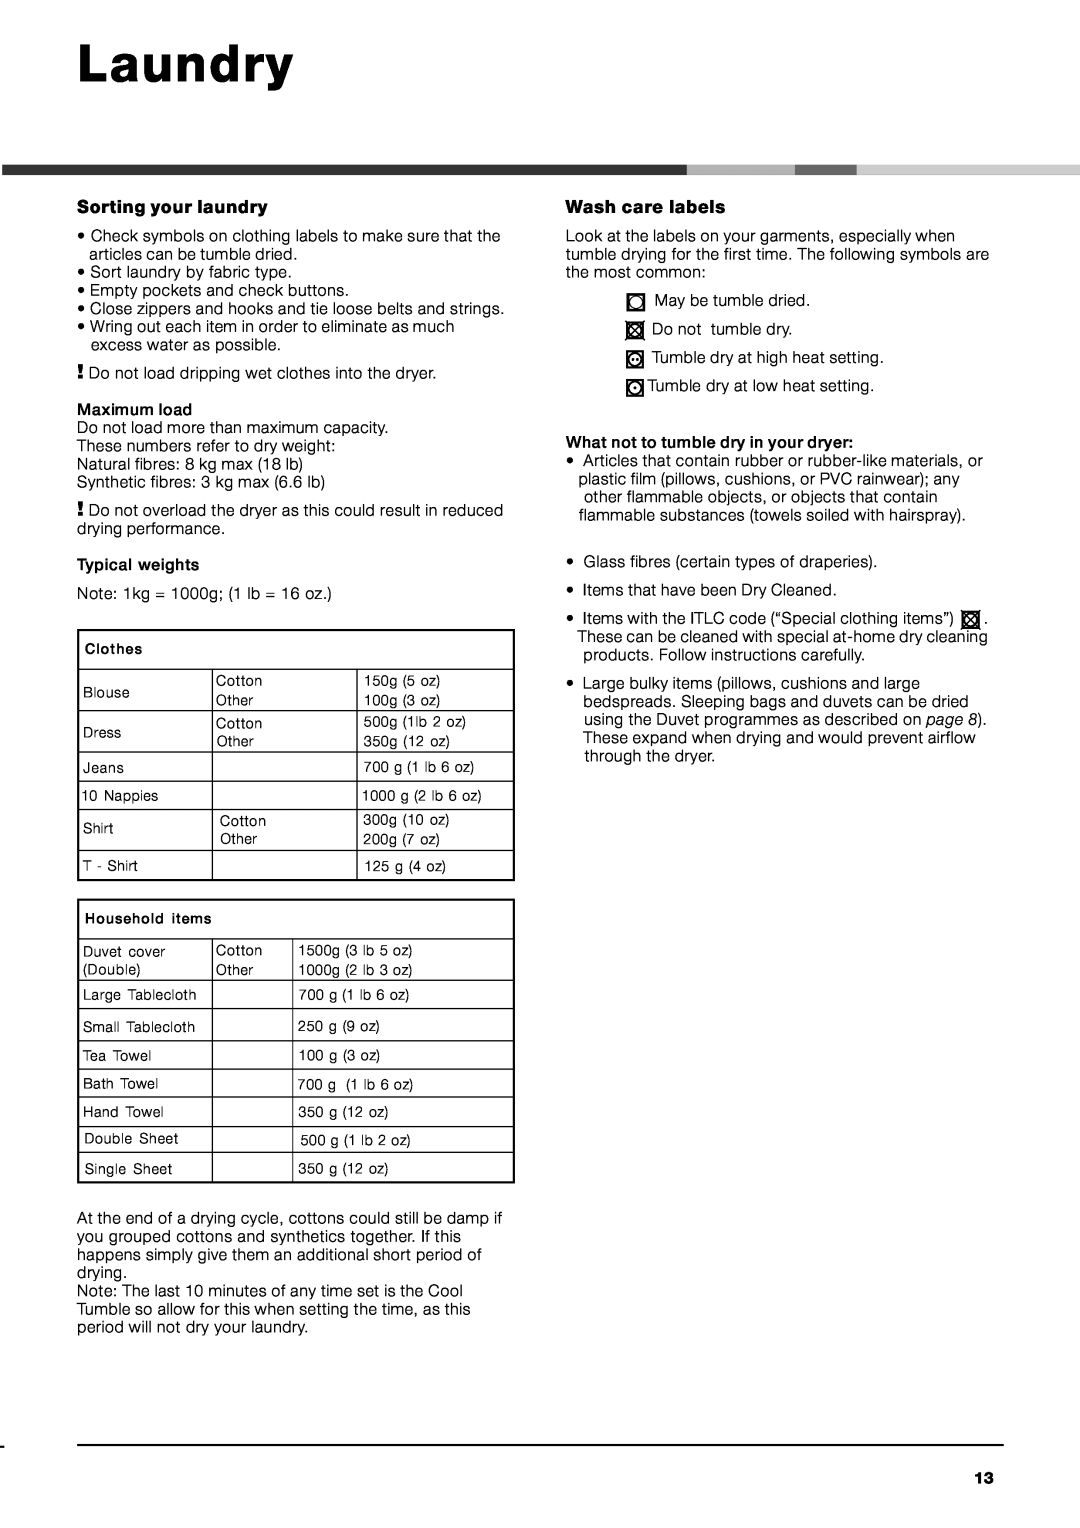 Hotpoint AQCF 852 BI, AQCF 852 BU instruction manual Laundry, Sorting your laundry, Wash care labels 